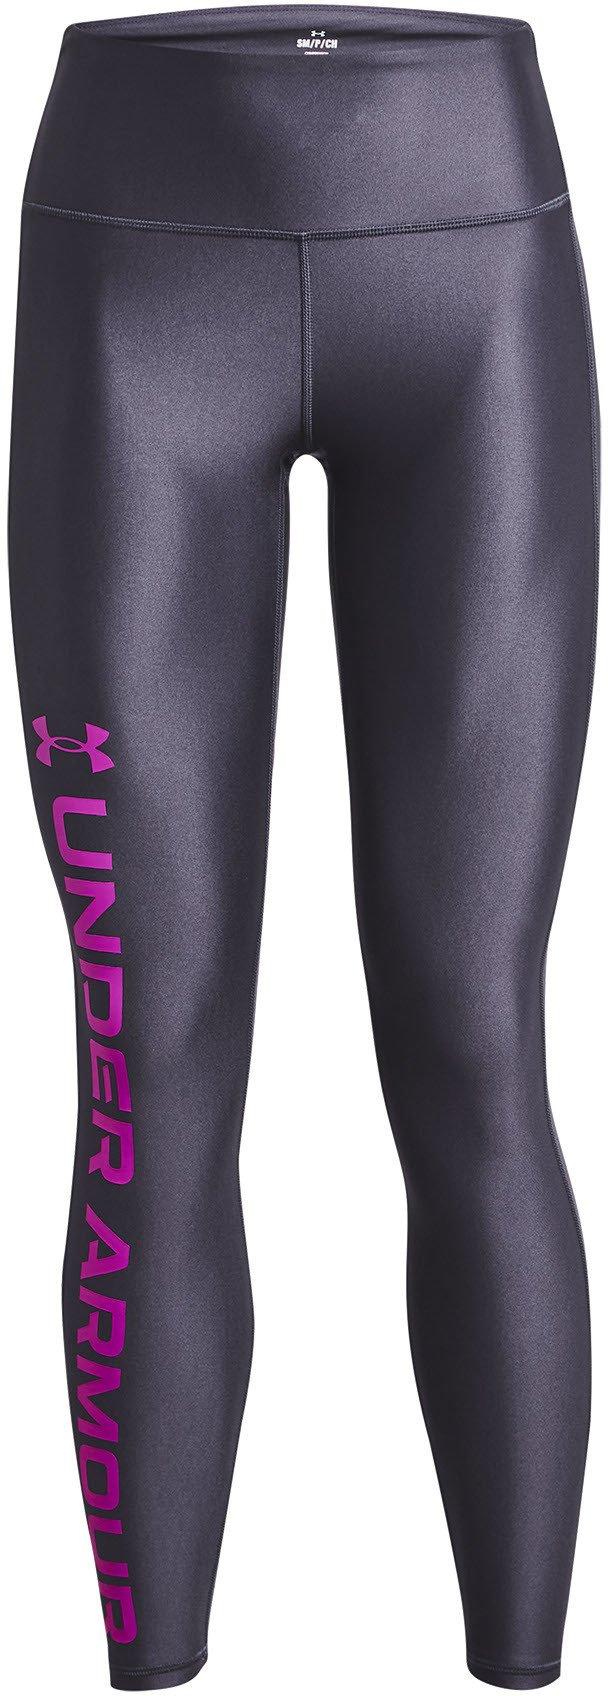 Under Armour Armour Branded Legging-GRY XS